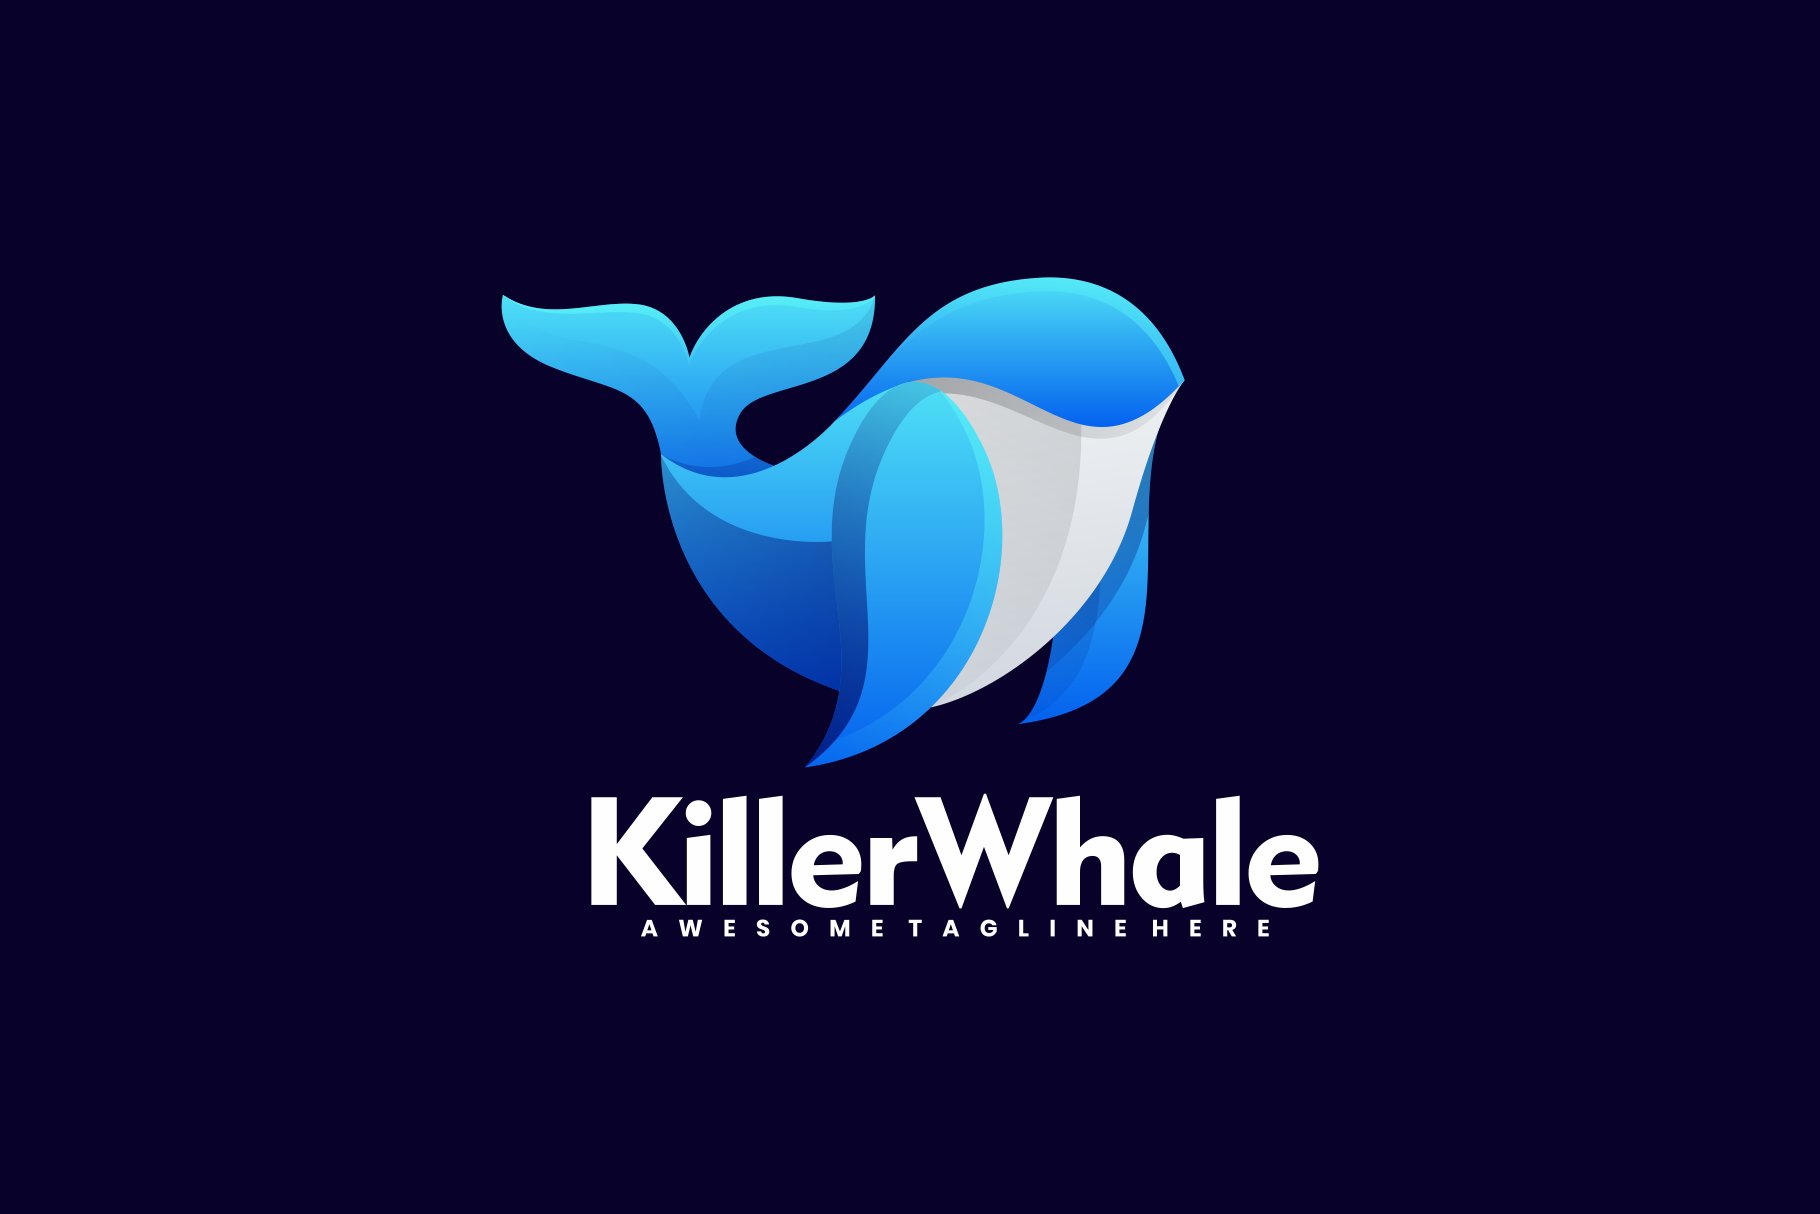 Killer Whale Gradient Colorful Style cover image.